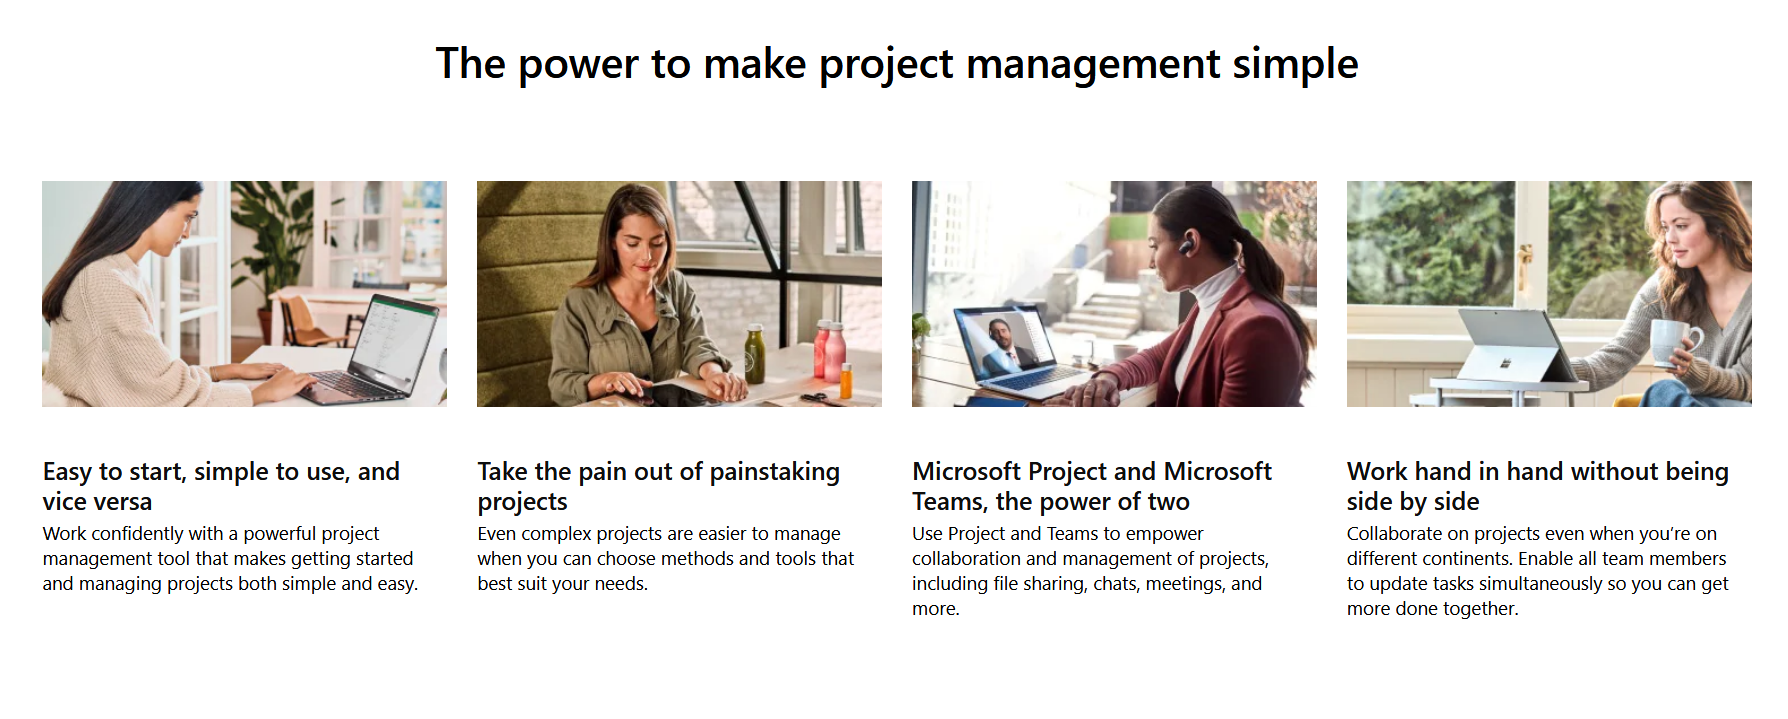 Get feedback from a vast remote working audience about Microsoft Project